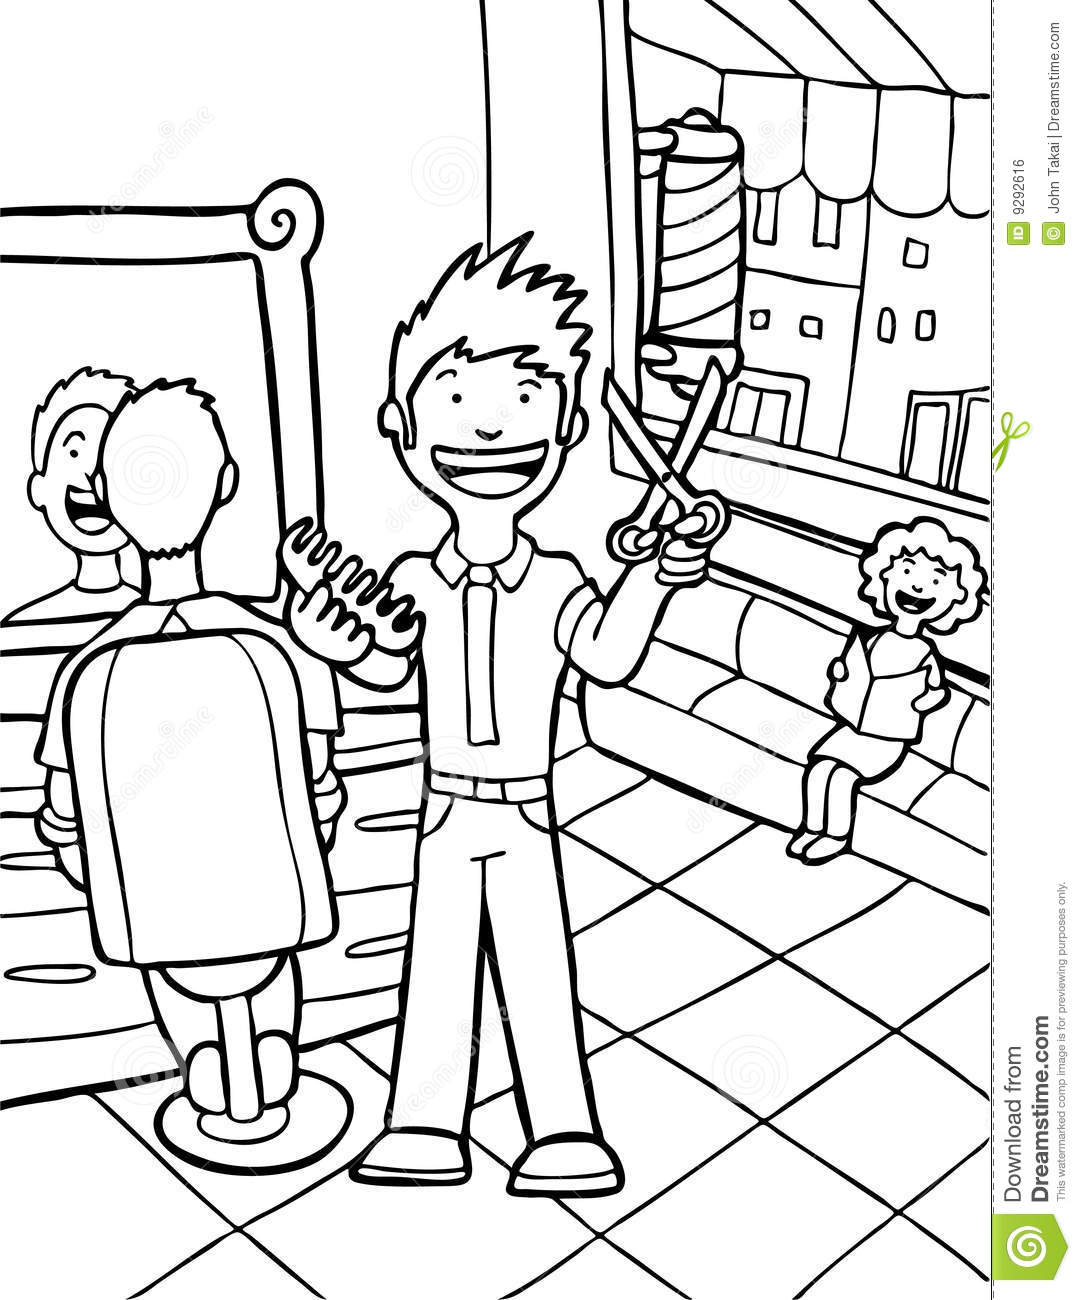 Barber shop clipart black and white